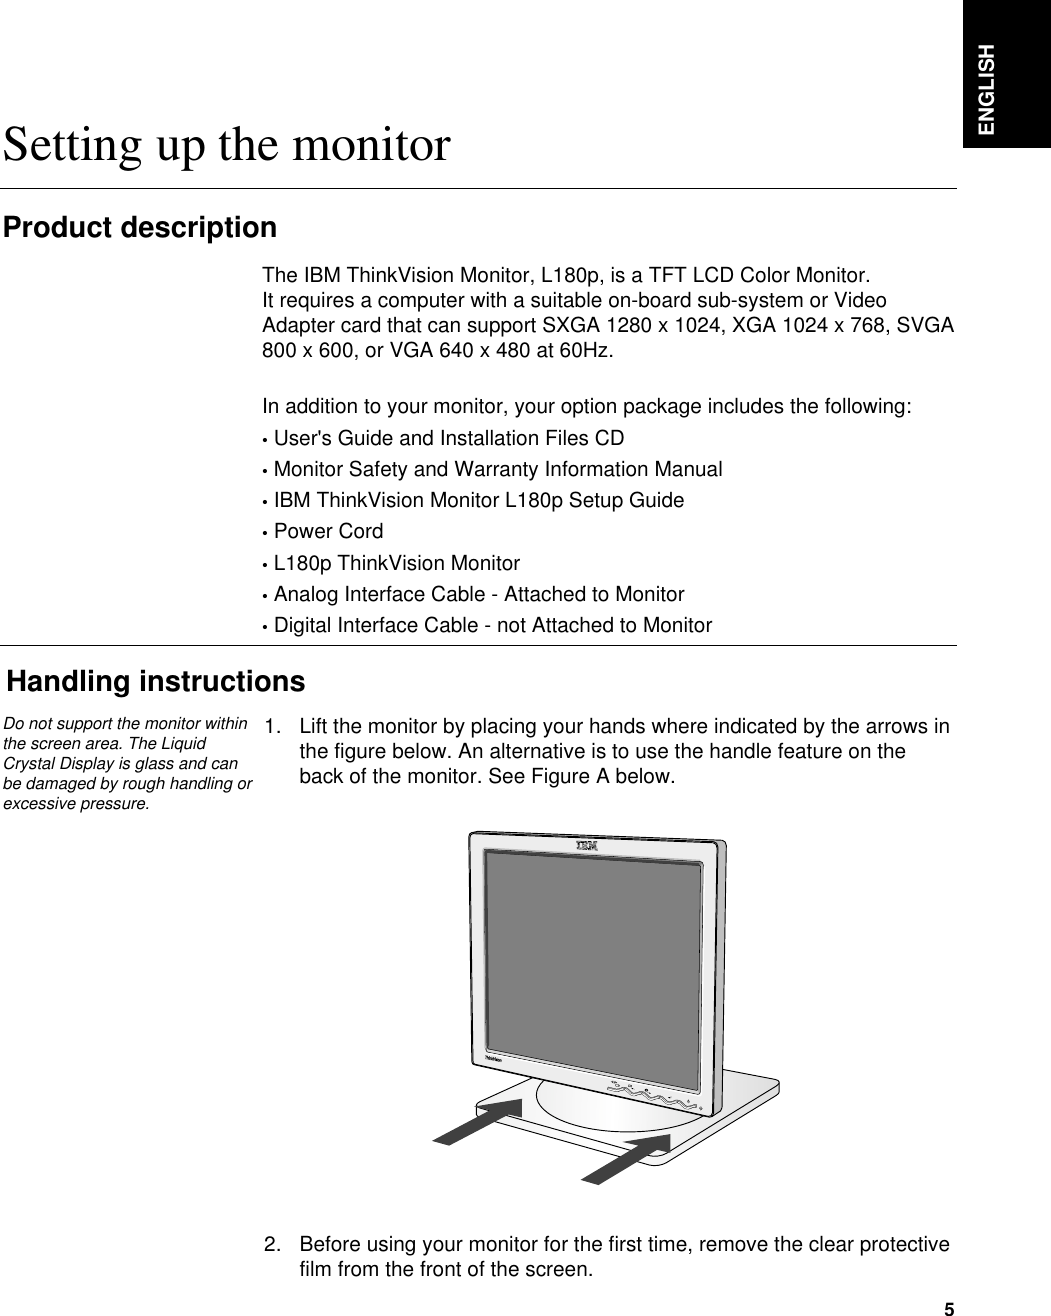 ENGLISH5Setting up the monitorHandling instructions1. Lift the monitor by placing your hands where indicated by the arrows inthe figure below. An alternative is to use the handle feature on theback of the monitor. See Figure A below.2. Before using your monitor for the first time, remove the clear protectivefilm from the front of the screen. Product descriptionThe IBM ThinkVision Monitor, L180p, is a TFT LCD Color Monitor. It requires a computer with a suitable on-board sub-system or VideoAdapter card that can support SXGA 1280 x 1024, XGA 1024 x 768, SVGA800 x 600, or VGA 640 x 480 at 60Hz.In addition to your monitor, your option package includes the following:•User&apos;s Guide and Installation Files CD•Monitor Safety and Warranty Information Manual•IBM ThinkVision Monitor L180p Setup Guide•Power Cord•L180p ThinkVision Monitor•Analog Interface Cable - Attached to Monitor•Digital Interface Cable - not Attached to MonitorDo not support the monitor withinthe screen area. The LiquidCrystal Display is glass and canbe damaged by rough handling orexcessive pressure.